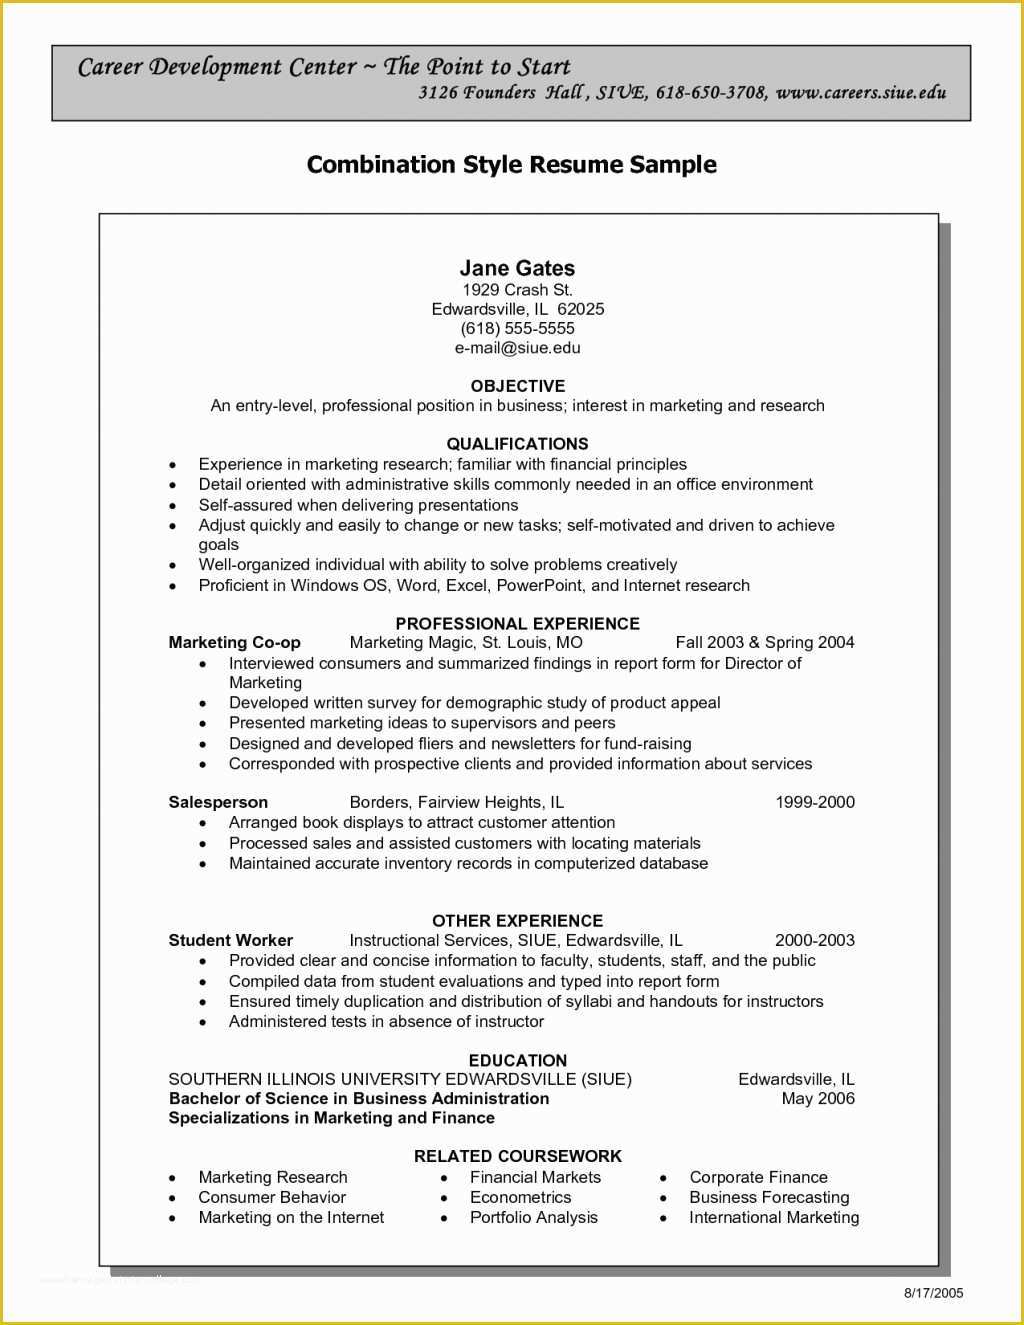 Free Resume Templates Pdf Of Resume and Template Chronological format Resume Template